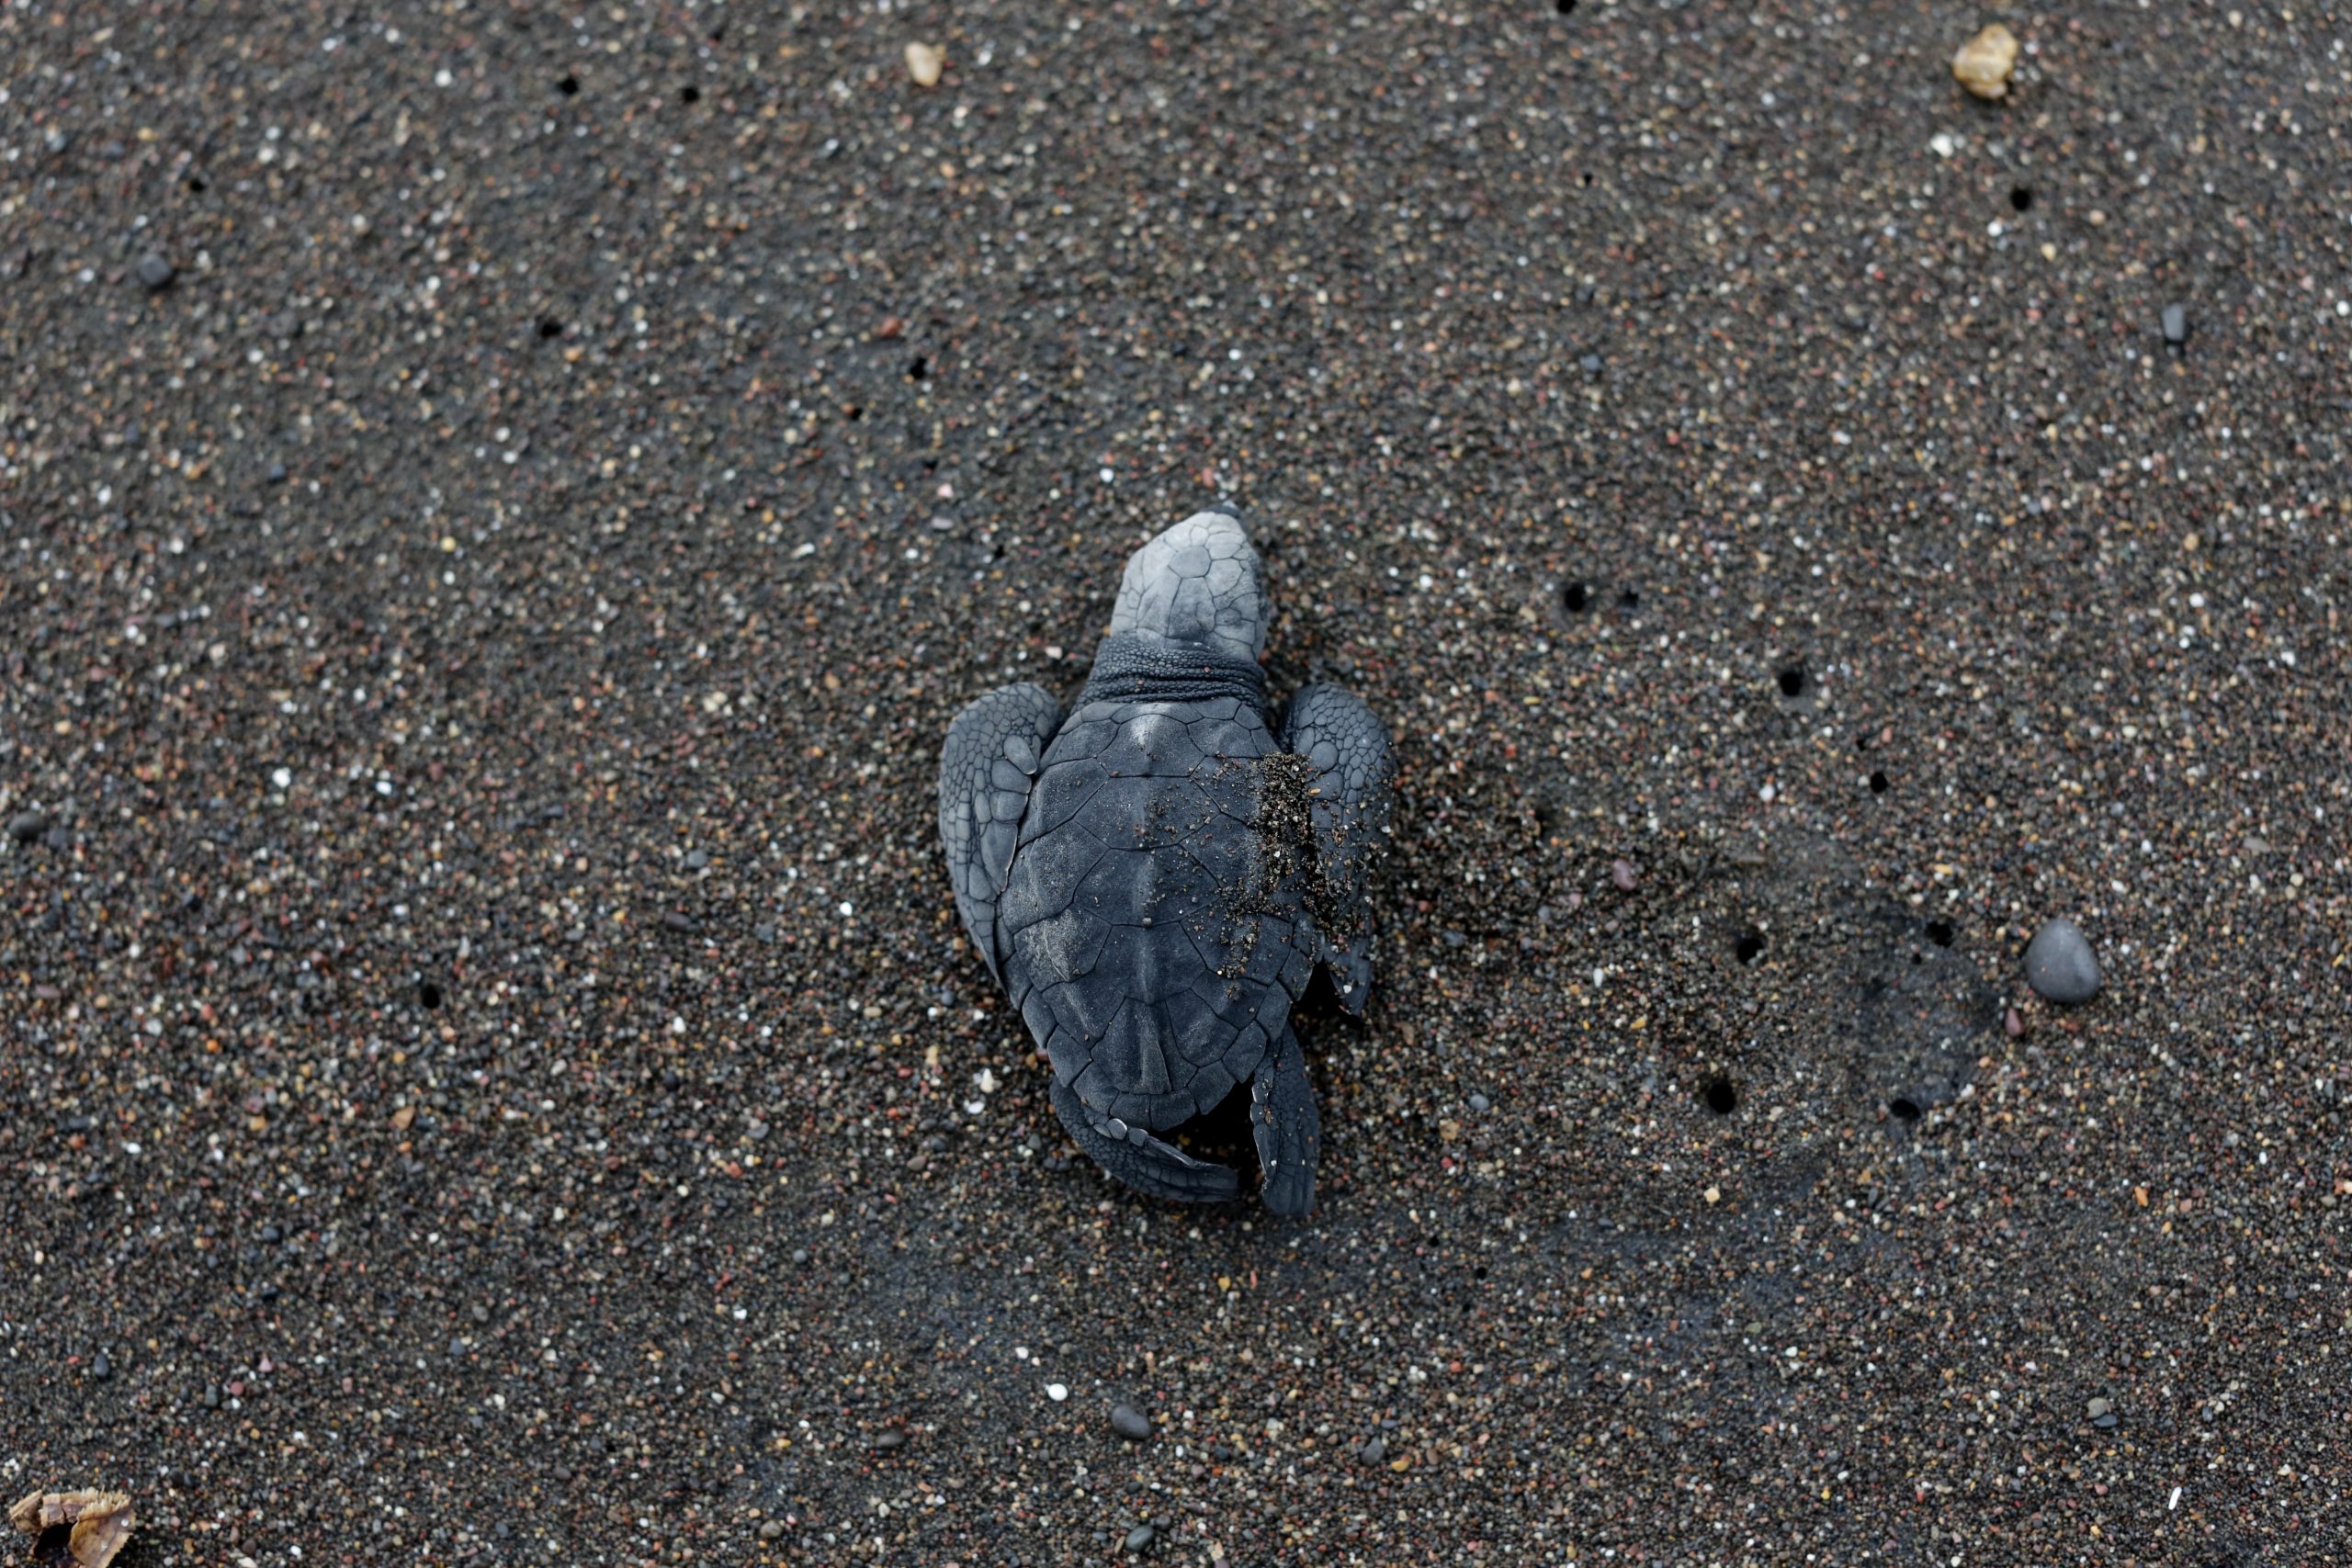 A dead baby ridley turtle on the beach